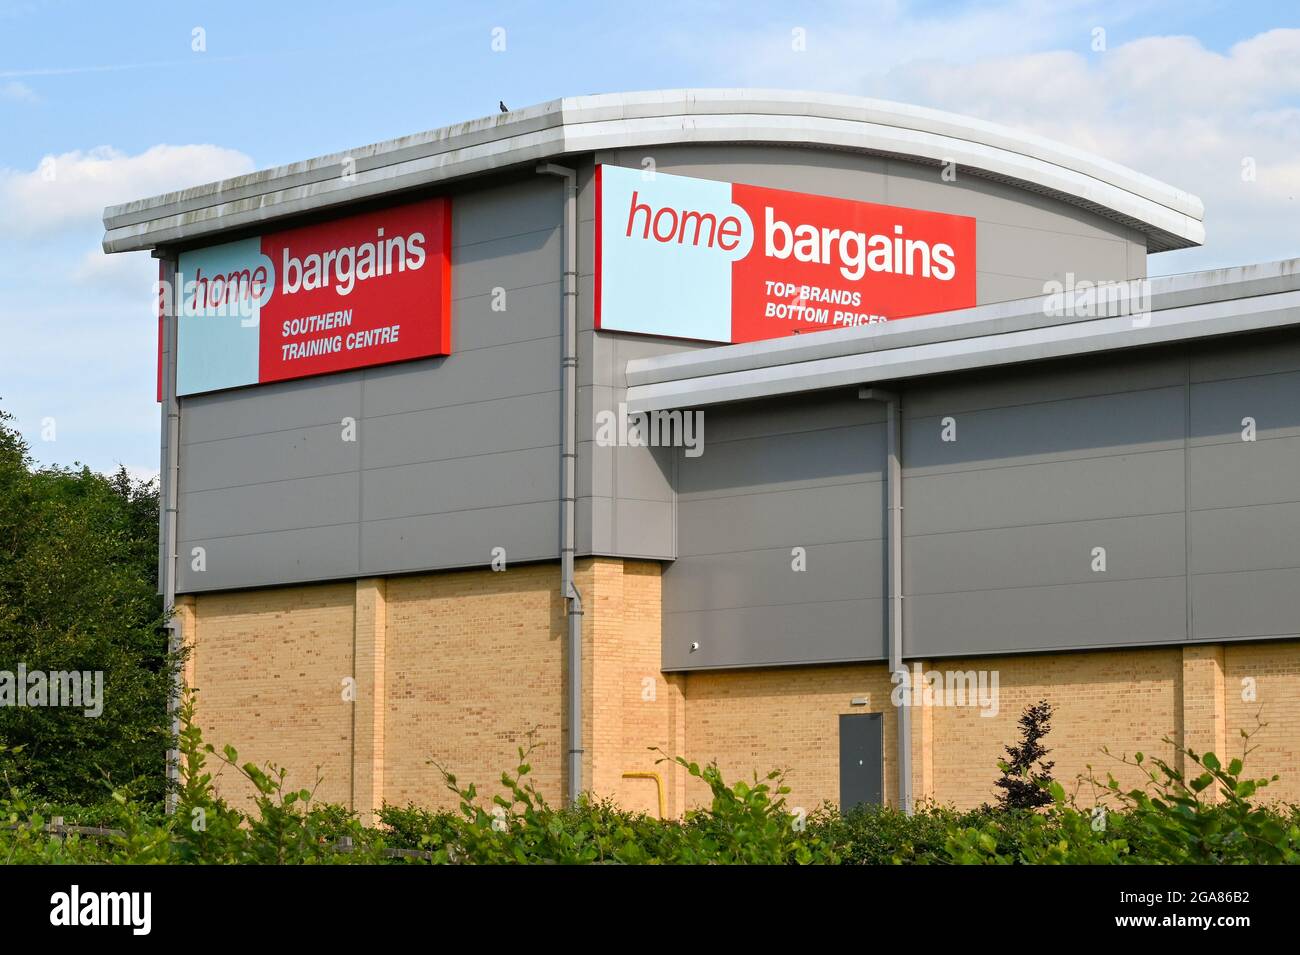 Andover, England - June 2021: Sign on the outside of the Southern Training and Distribution Centre of the Home bargains chain of discount stores Stock Photo